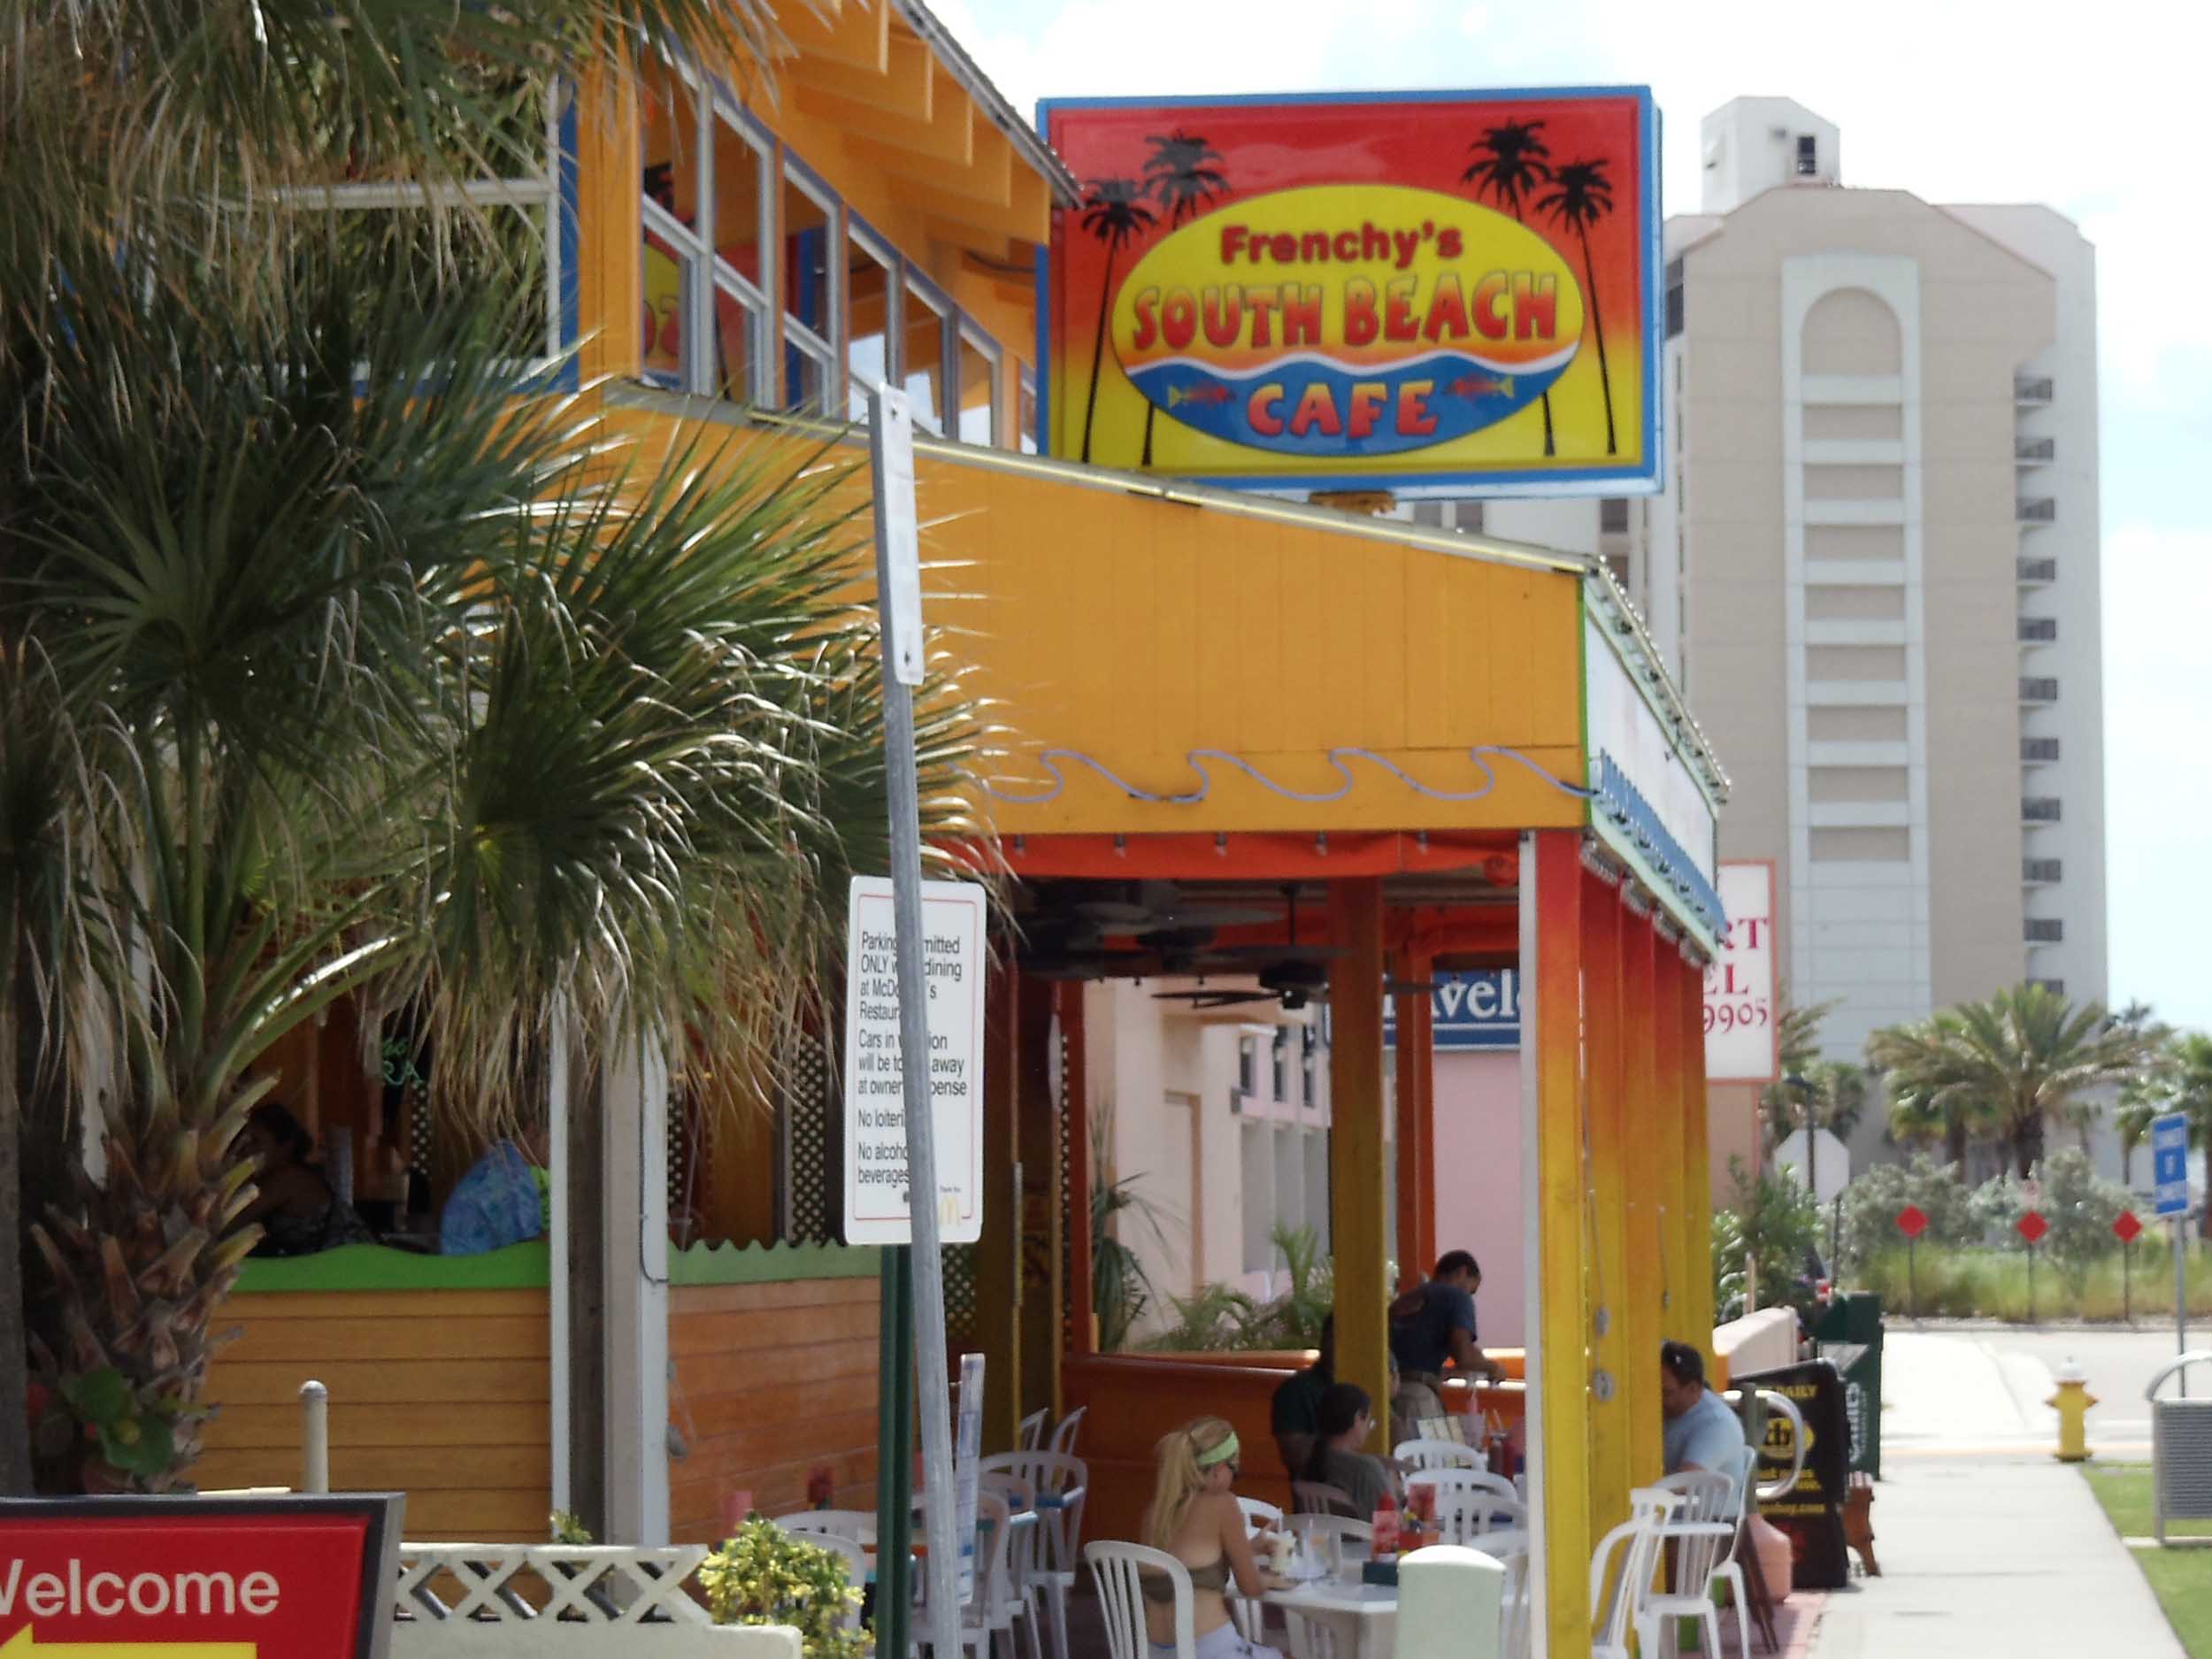 Frenchy's South Beach Cafe Entrance